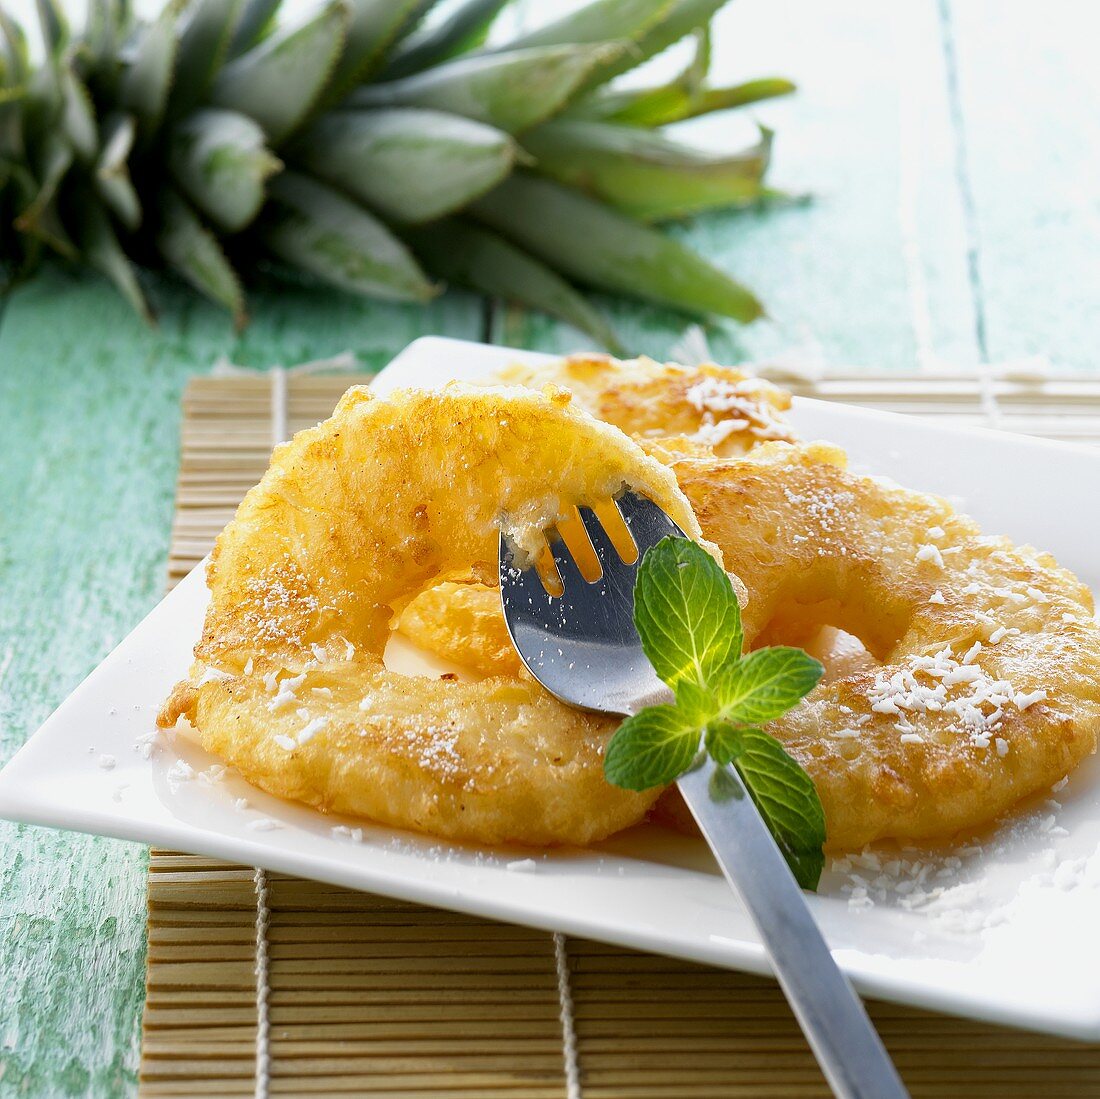 Baked pineapple slices with icing sugar (China)